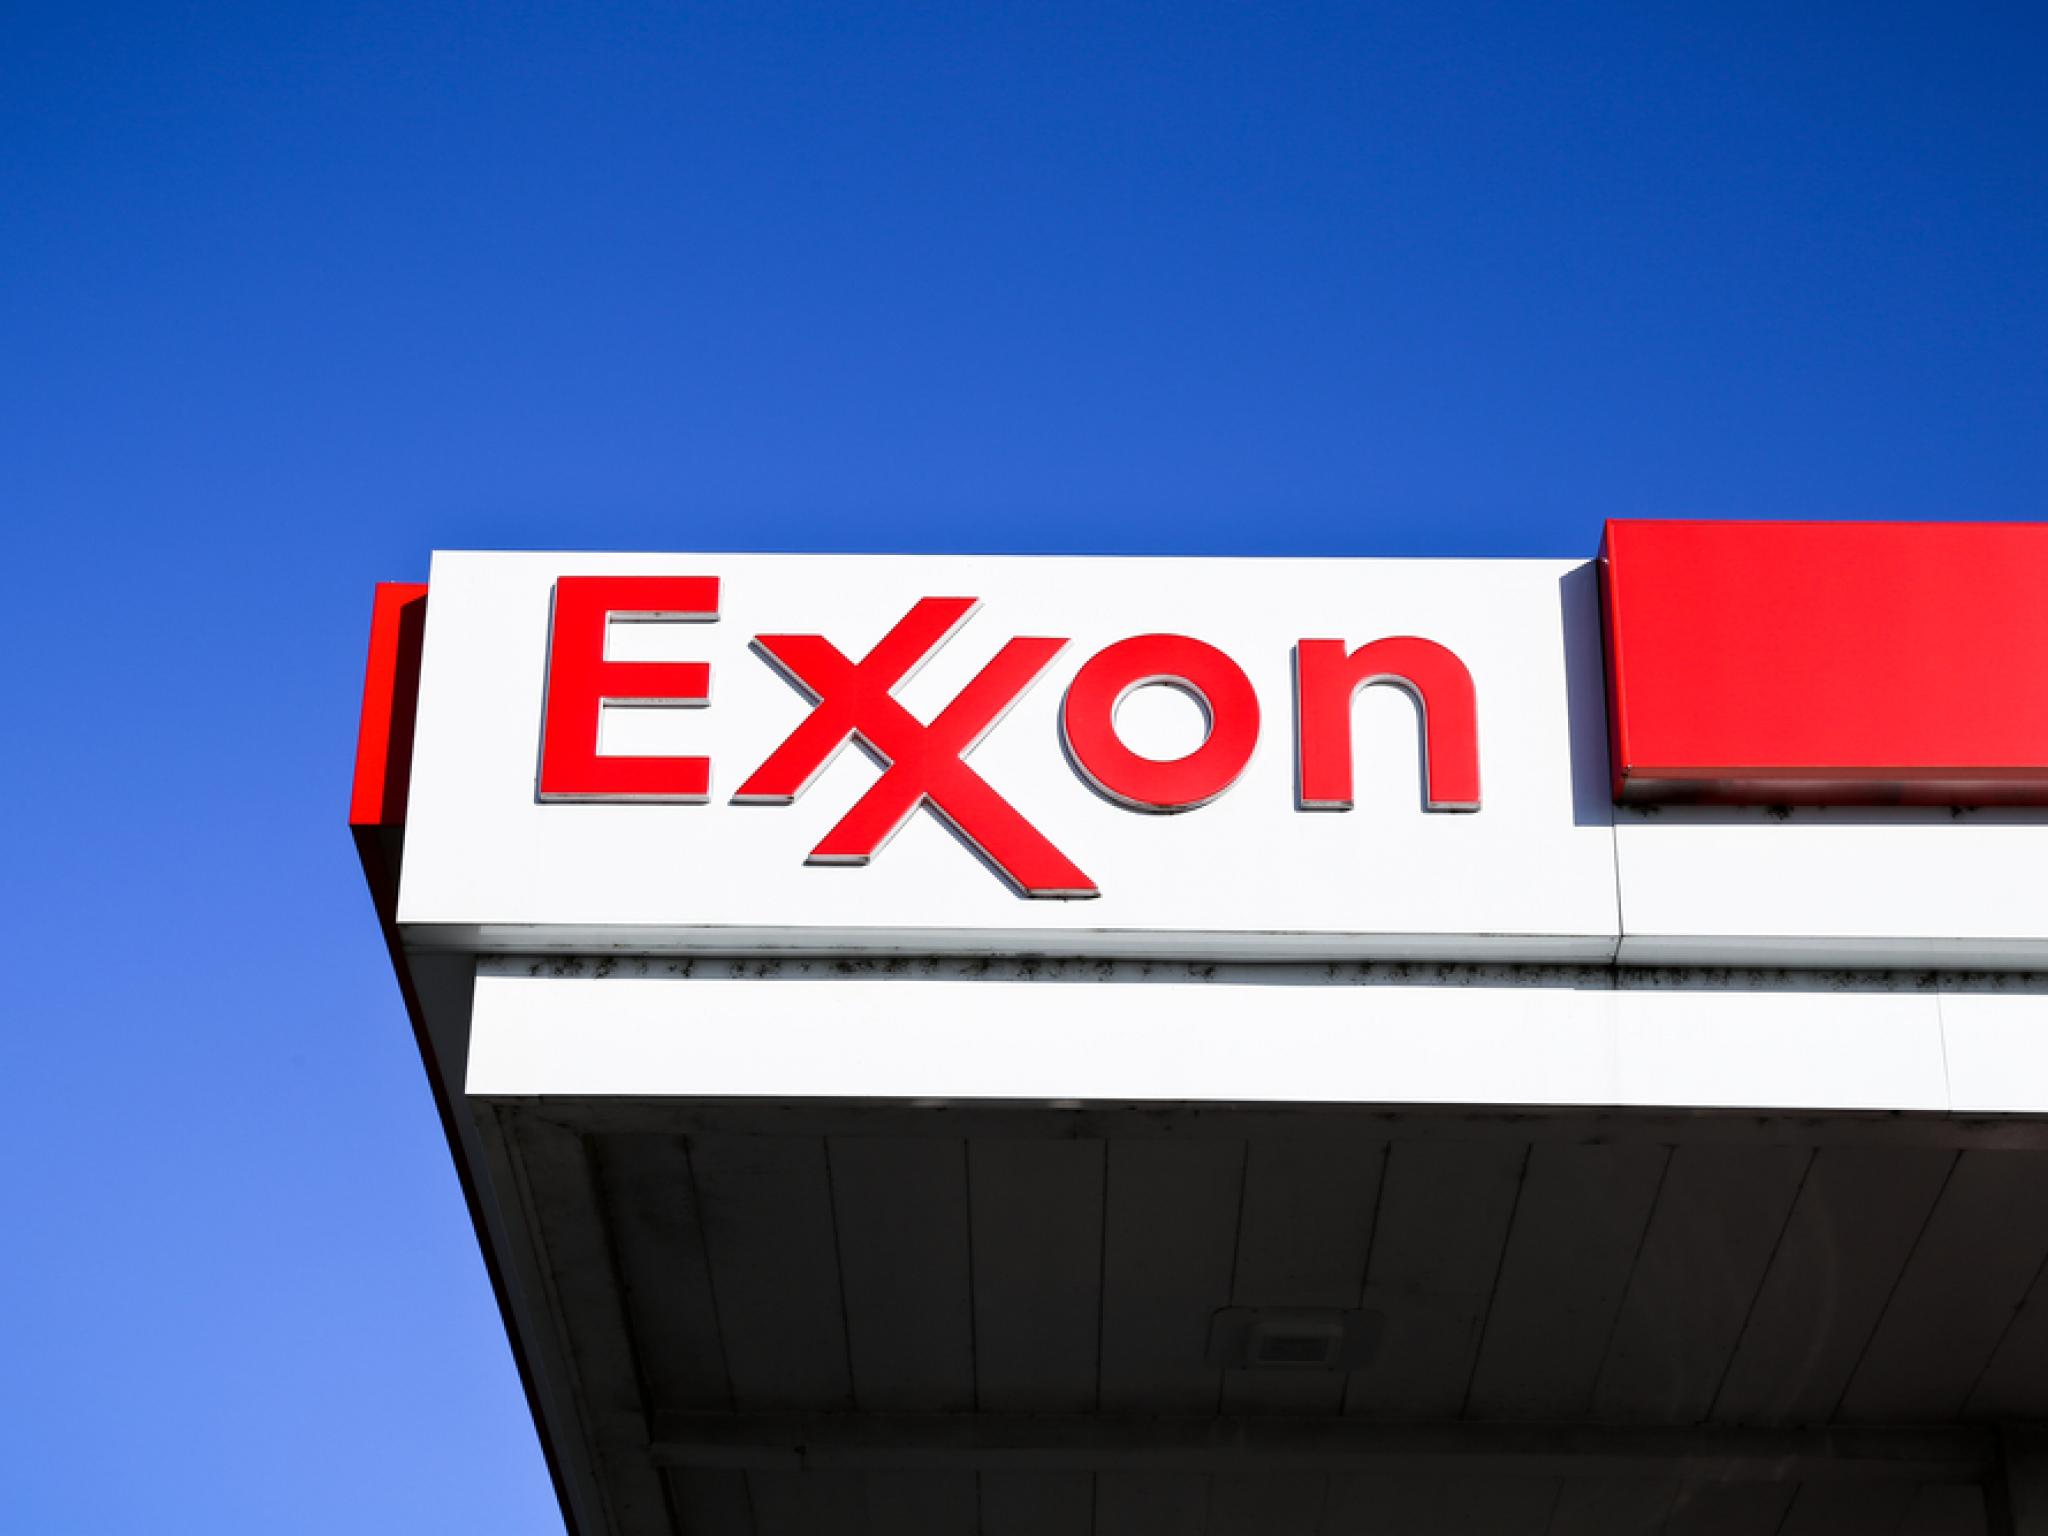  whats-going-on-with-exxon-mobil-shares-tuesday 